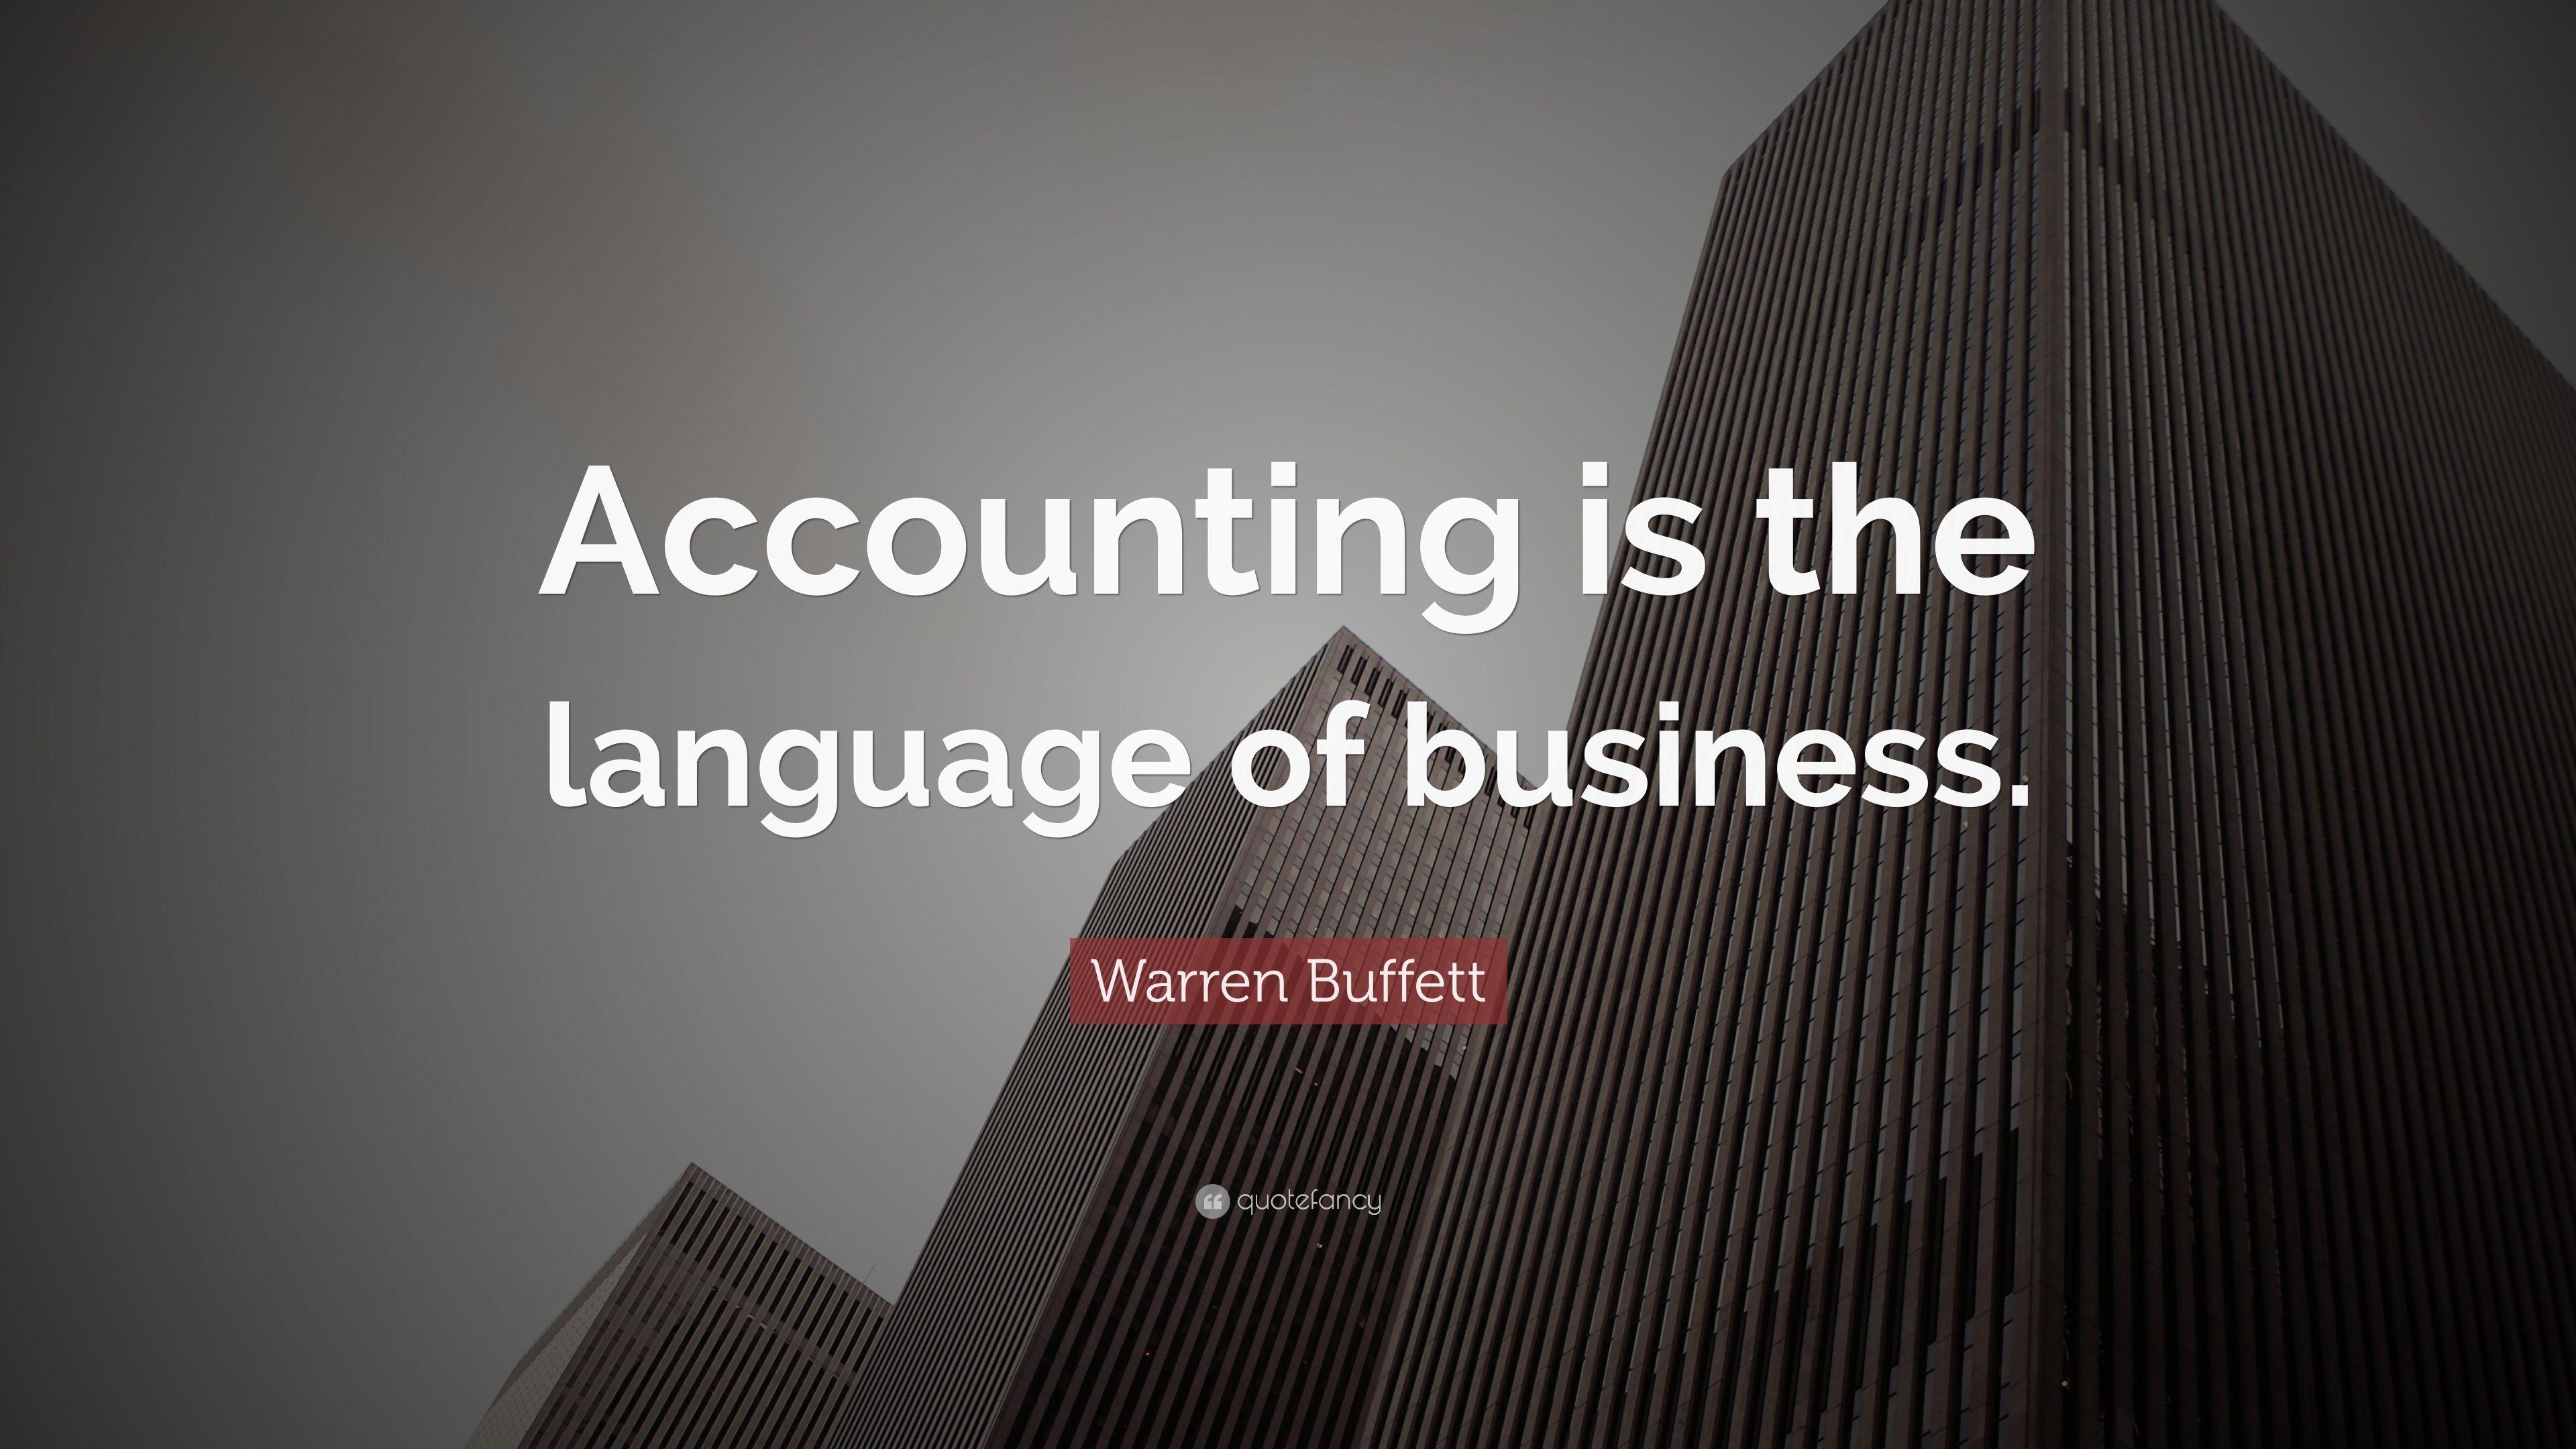 Warren Buffett Quote: “Accounting is the language of business